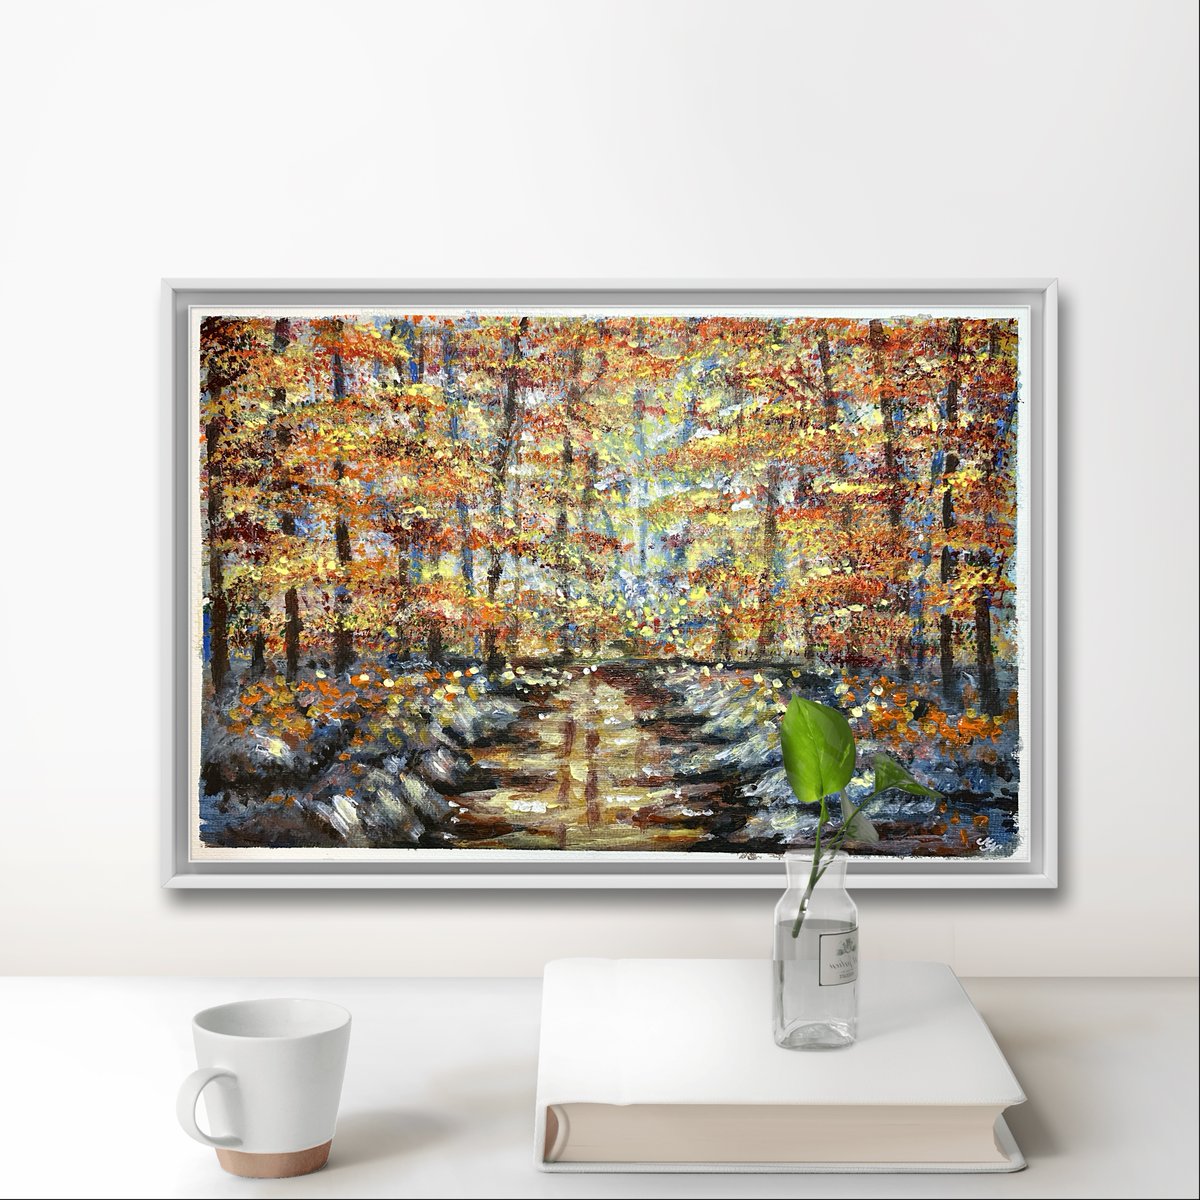 Experience the tranquillity of nature with our latest artwork, 'Autumn Forest.' 🌳🍂 #Autumn #Nature #Art #Impressionism #Tranquility artcursor.com/products/autum…